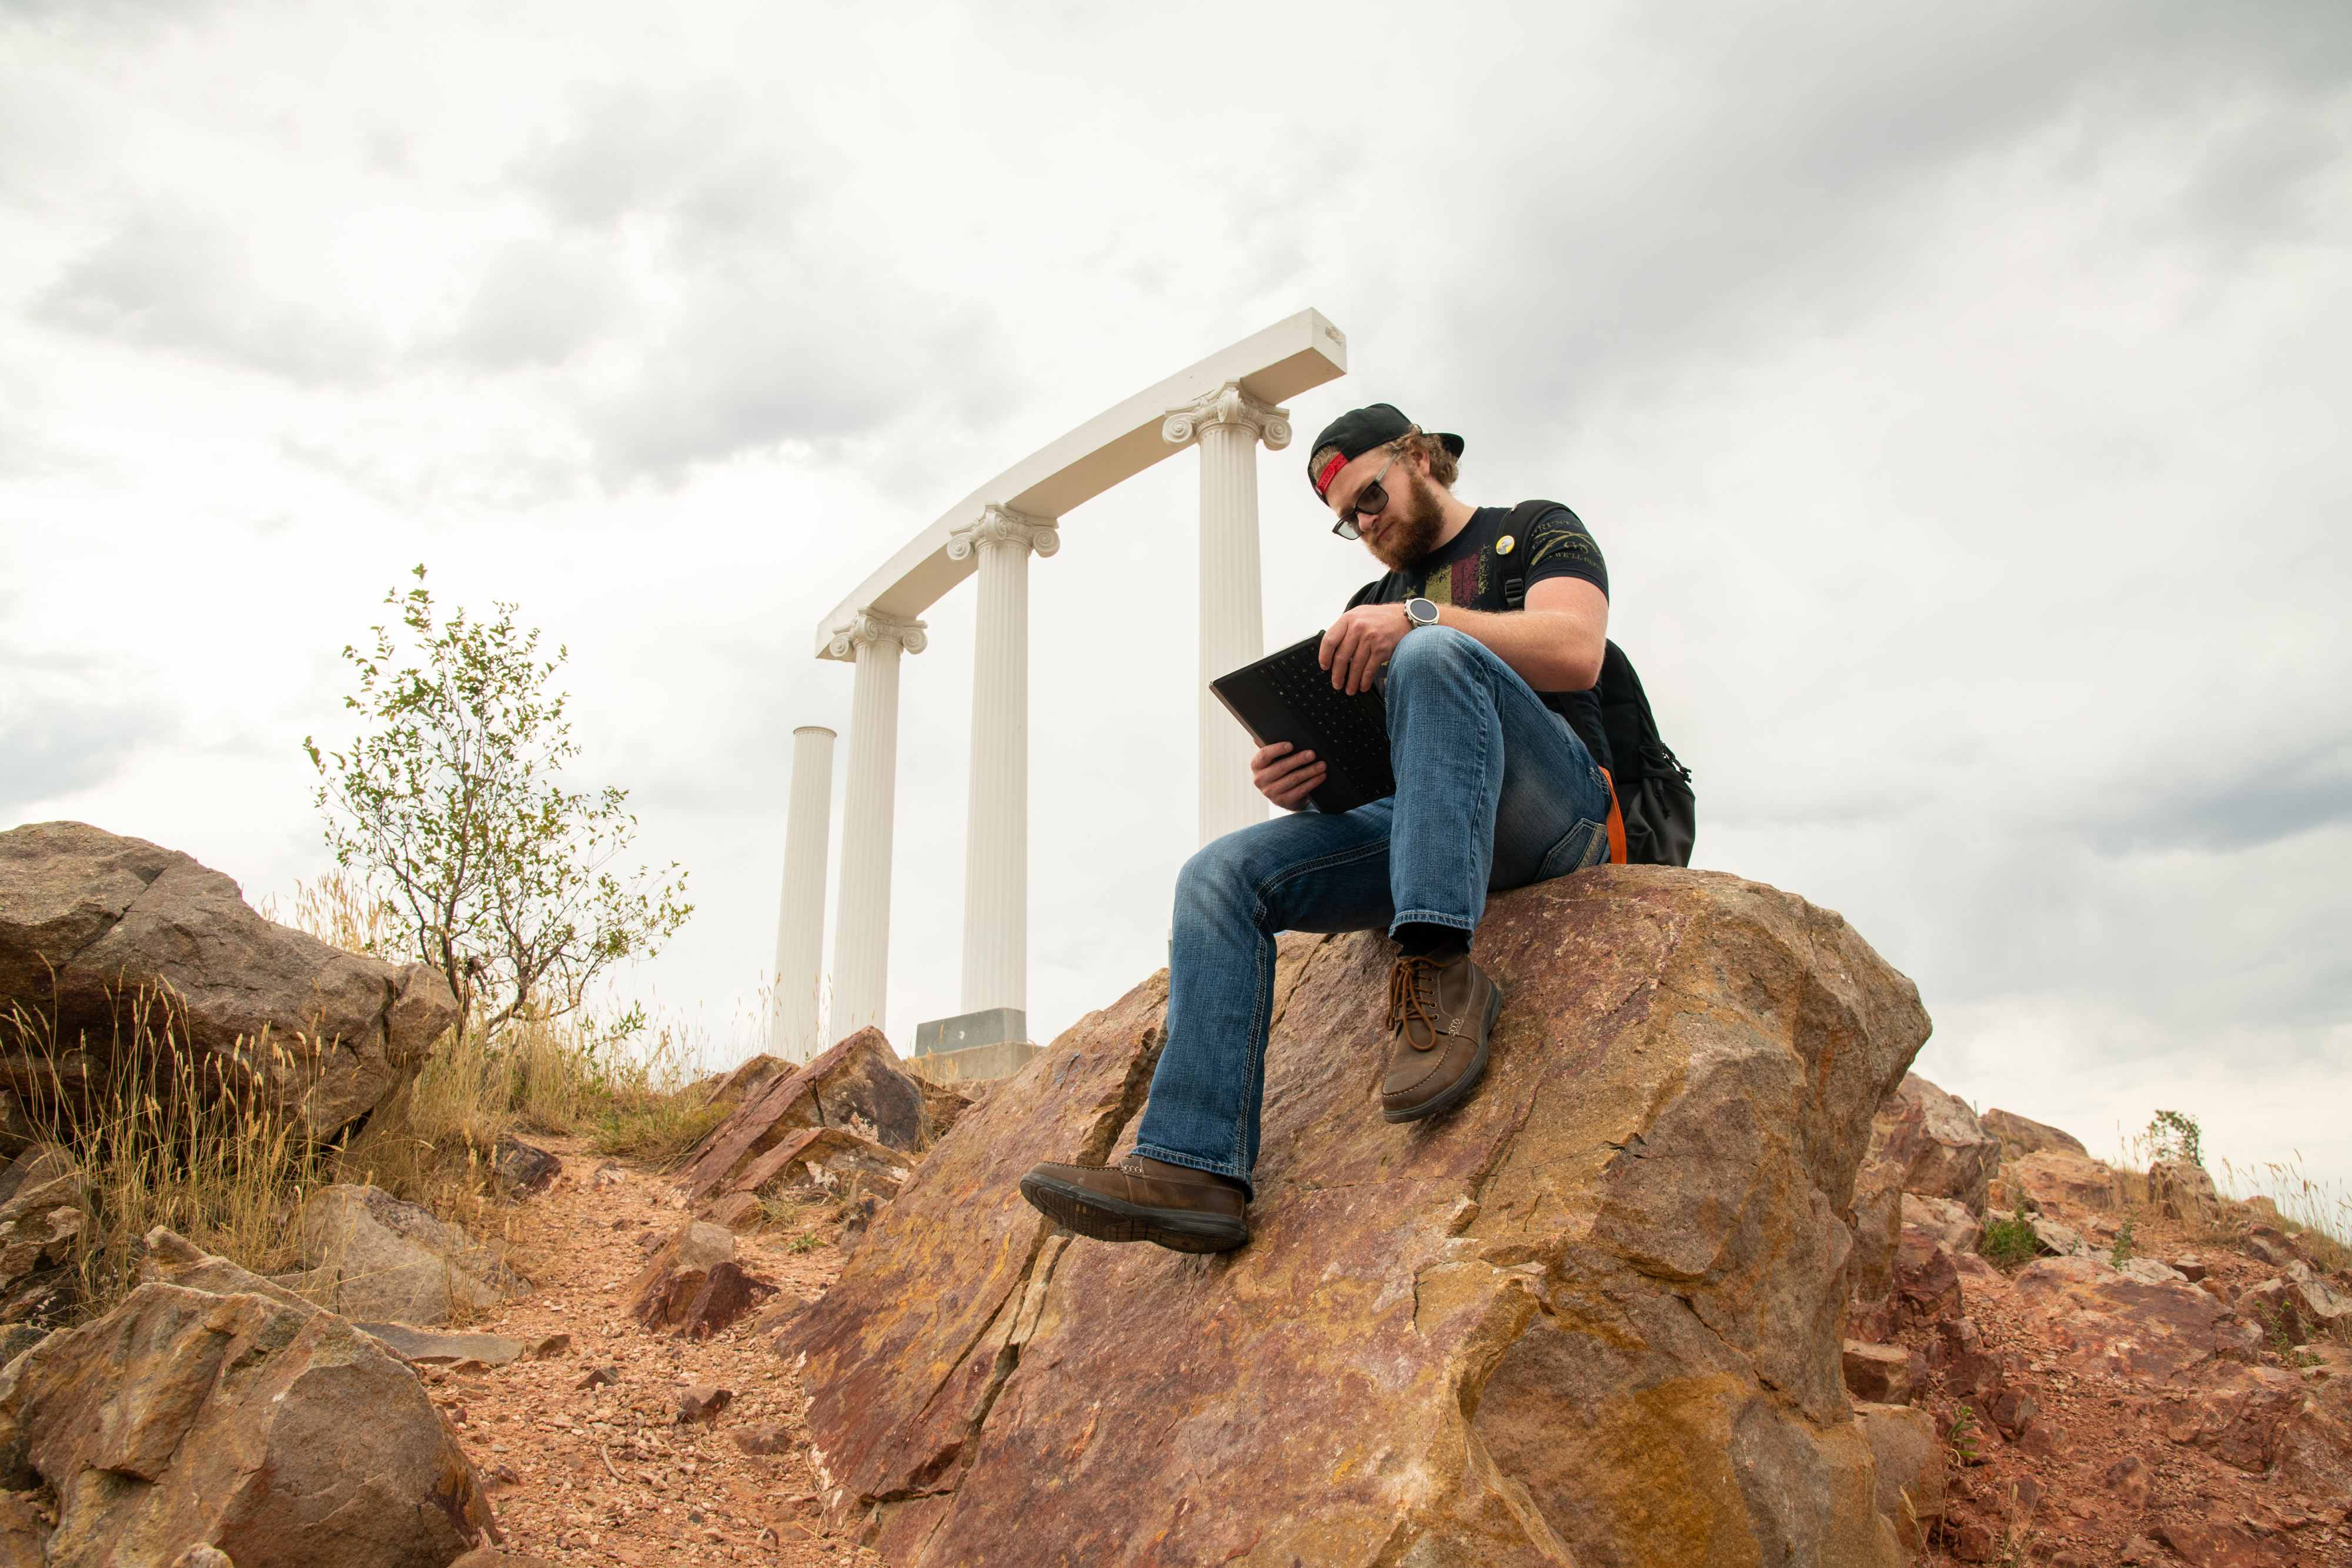 Student using a laptop sitting on a rock with the Red Hill pillars in the background.